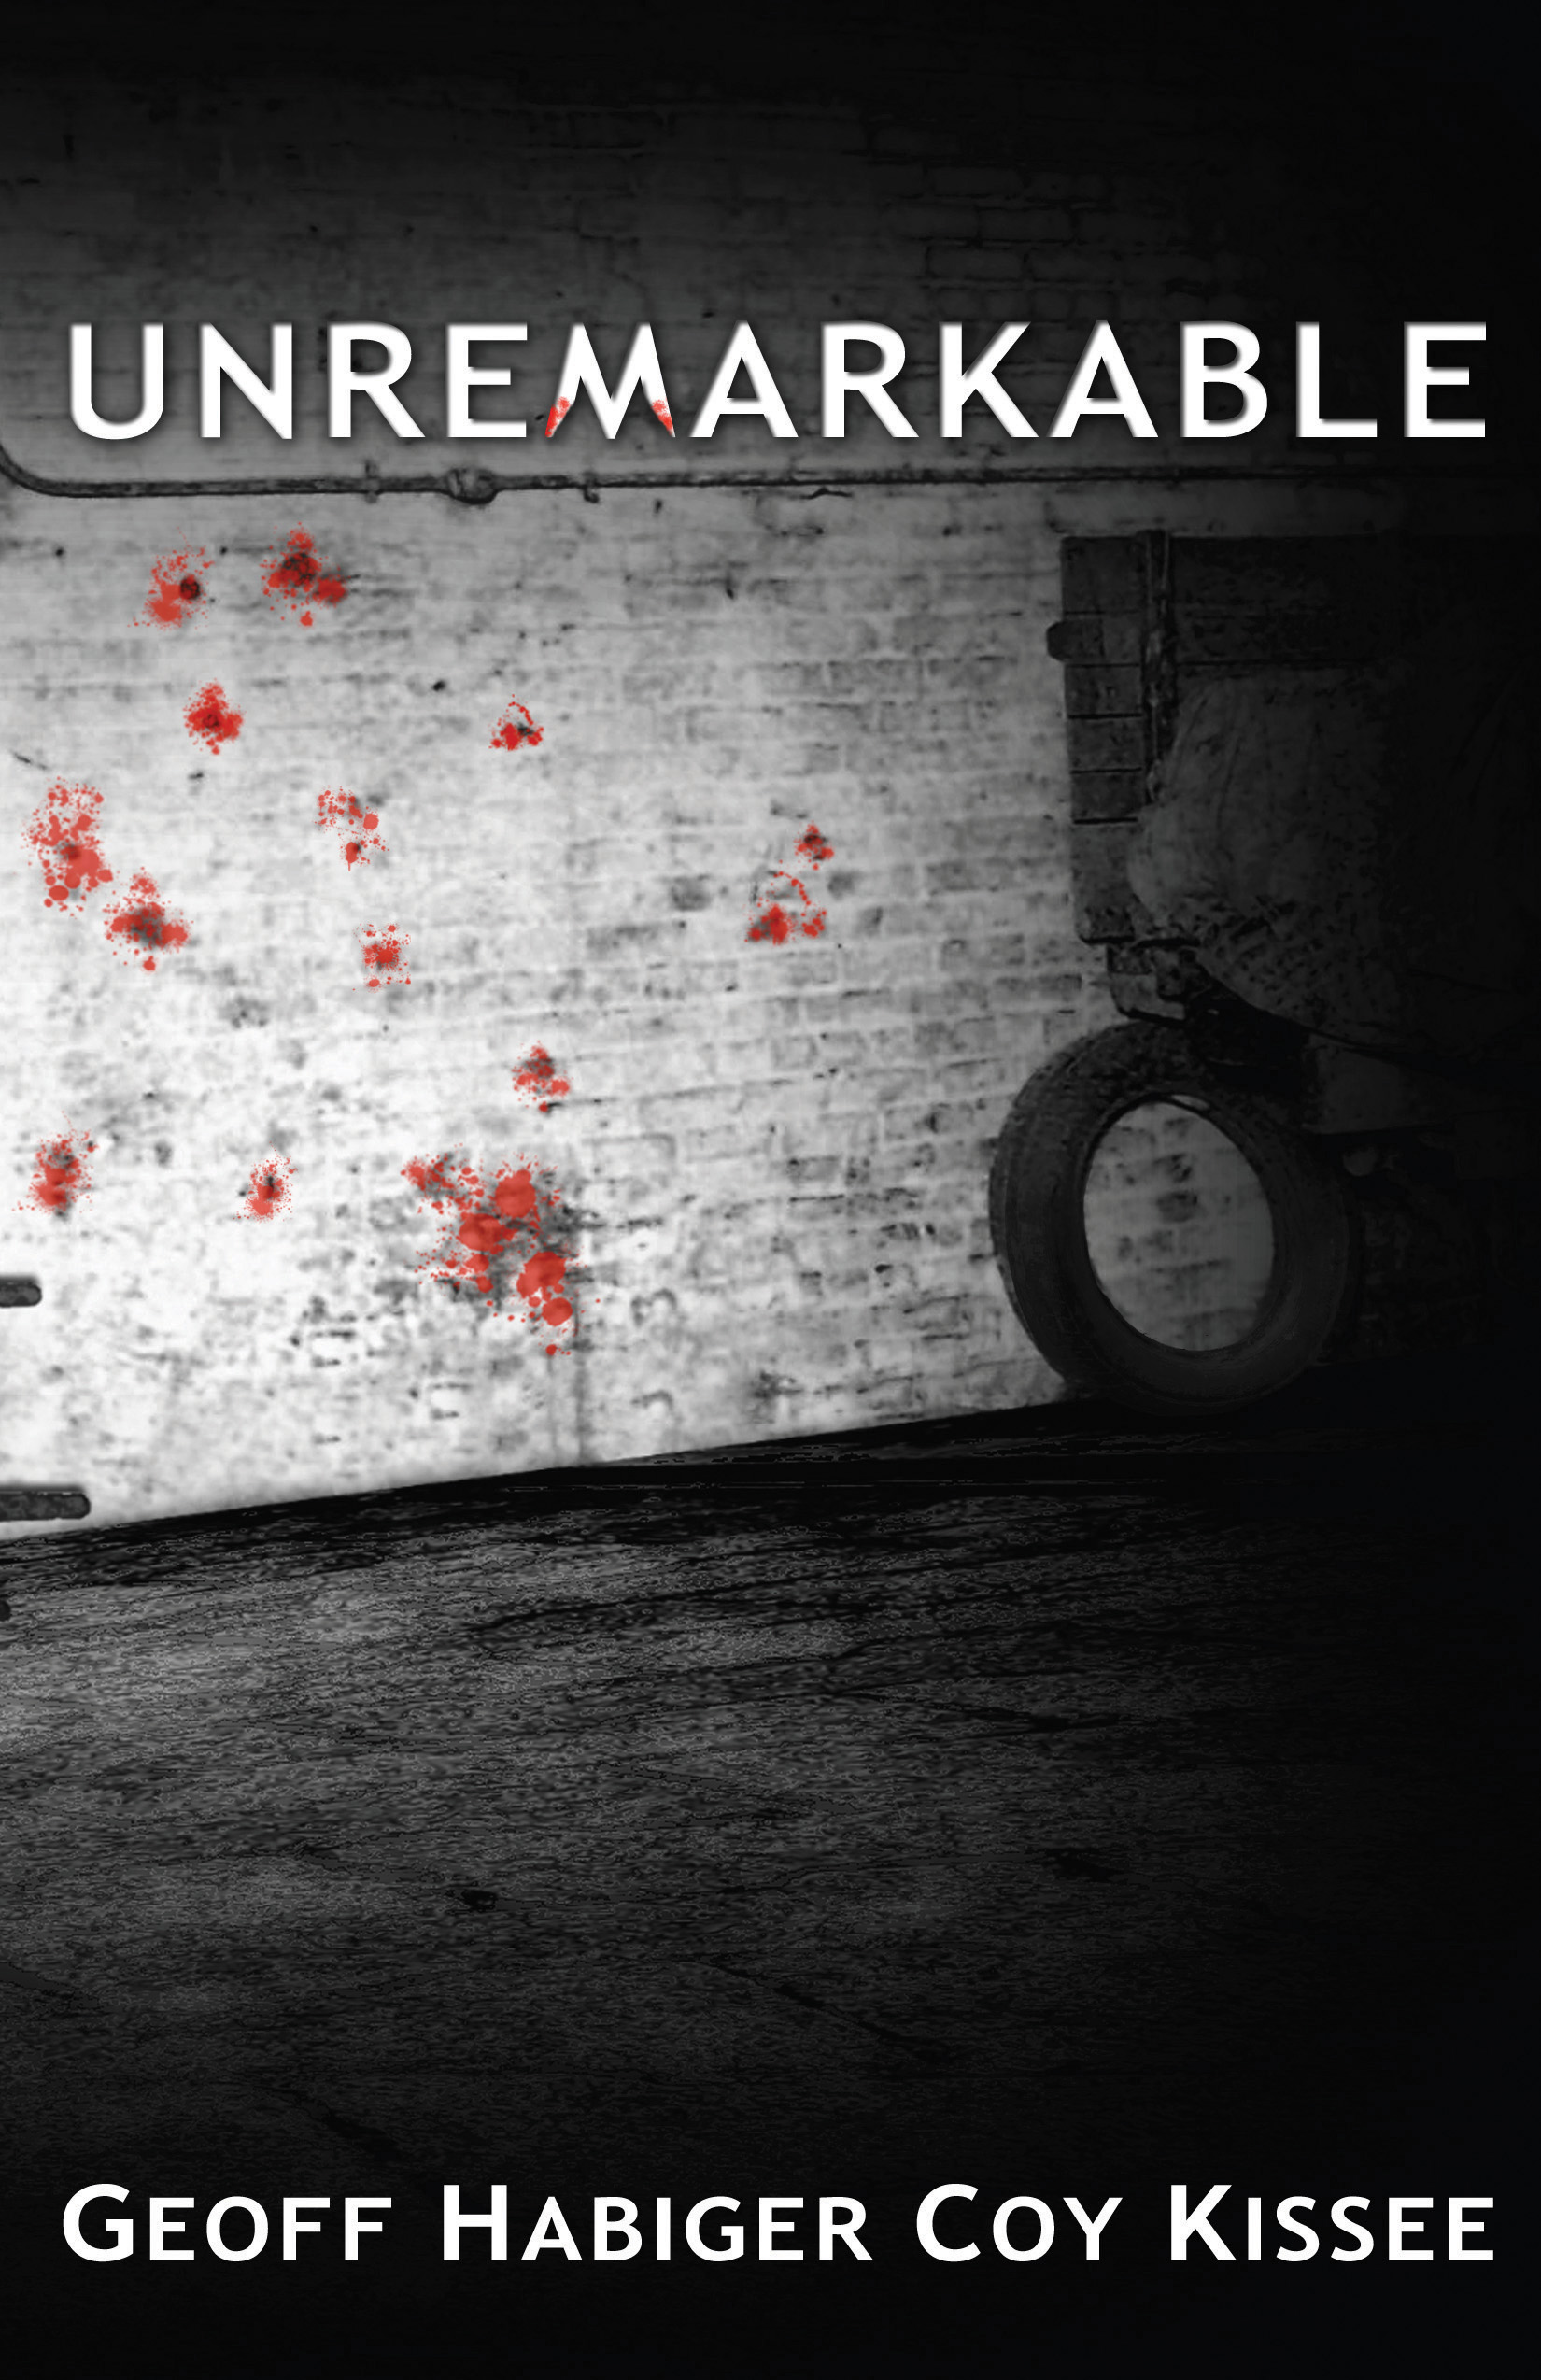 Cover image of Unremarkable by Geoff Habiger and Coy Kissee